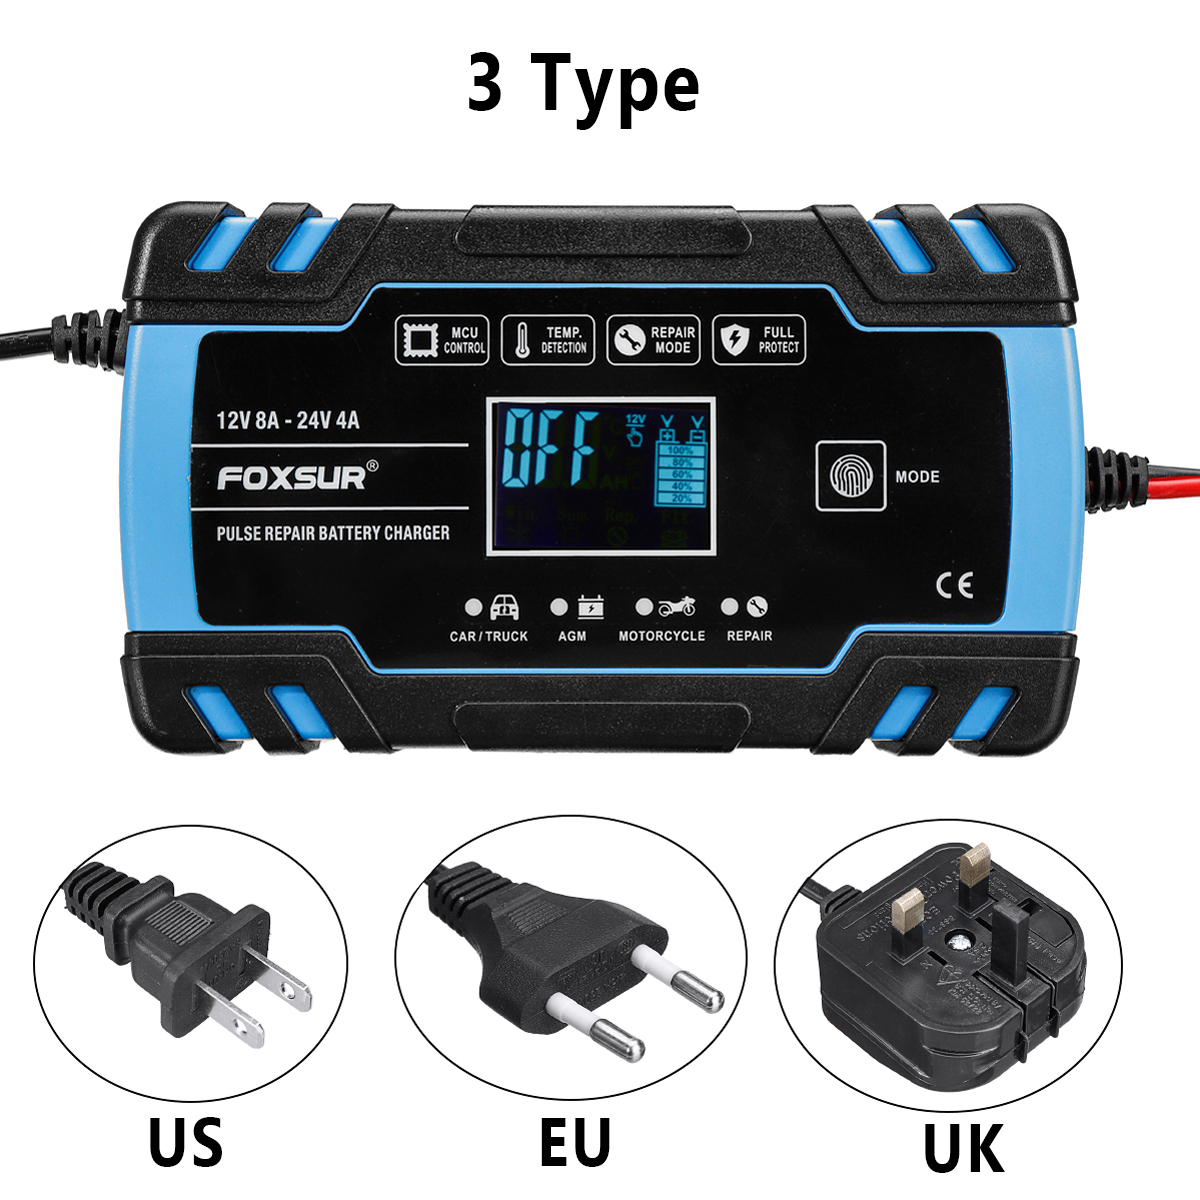 Display-Battery-Charger-12V-8A24V-4A-Automotive-Smart-Battery-Maintainer-for-Car-Truck-Motorcycle-Mu-1621856-7